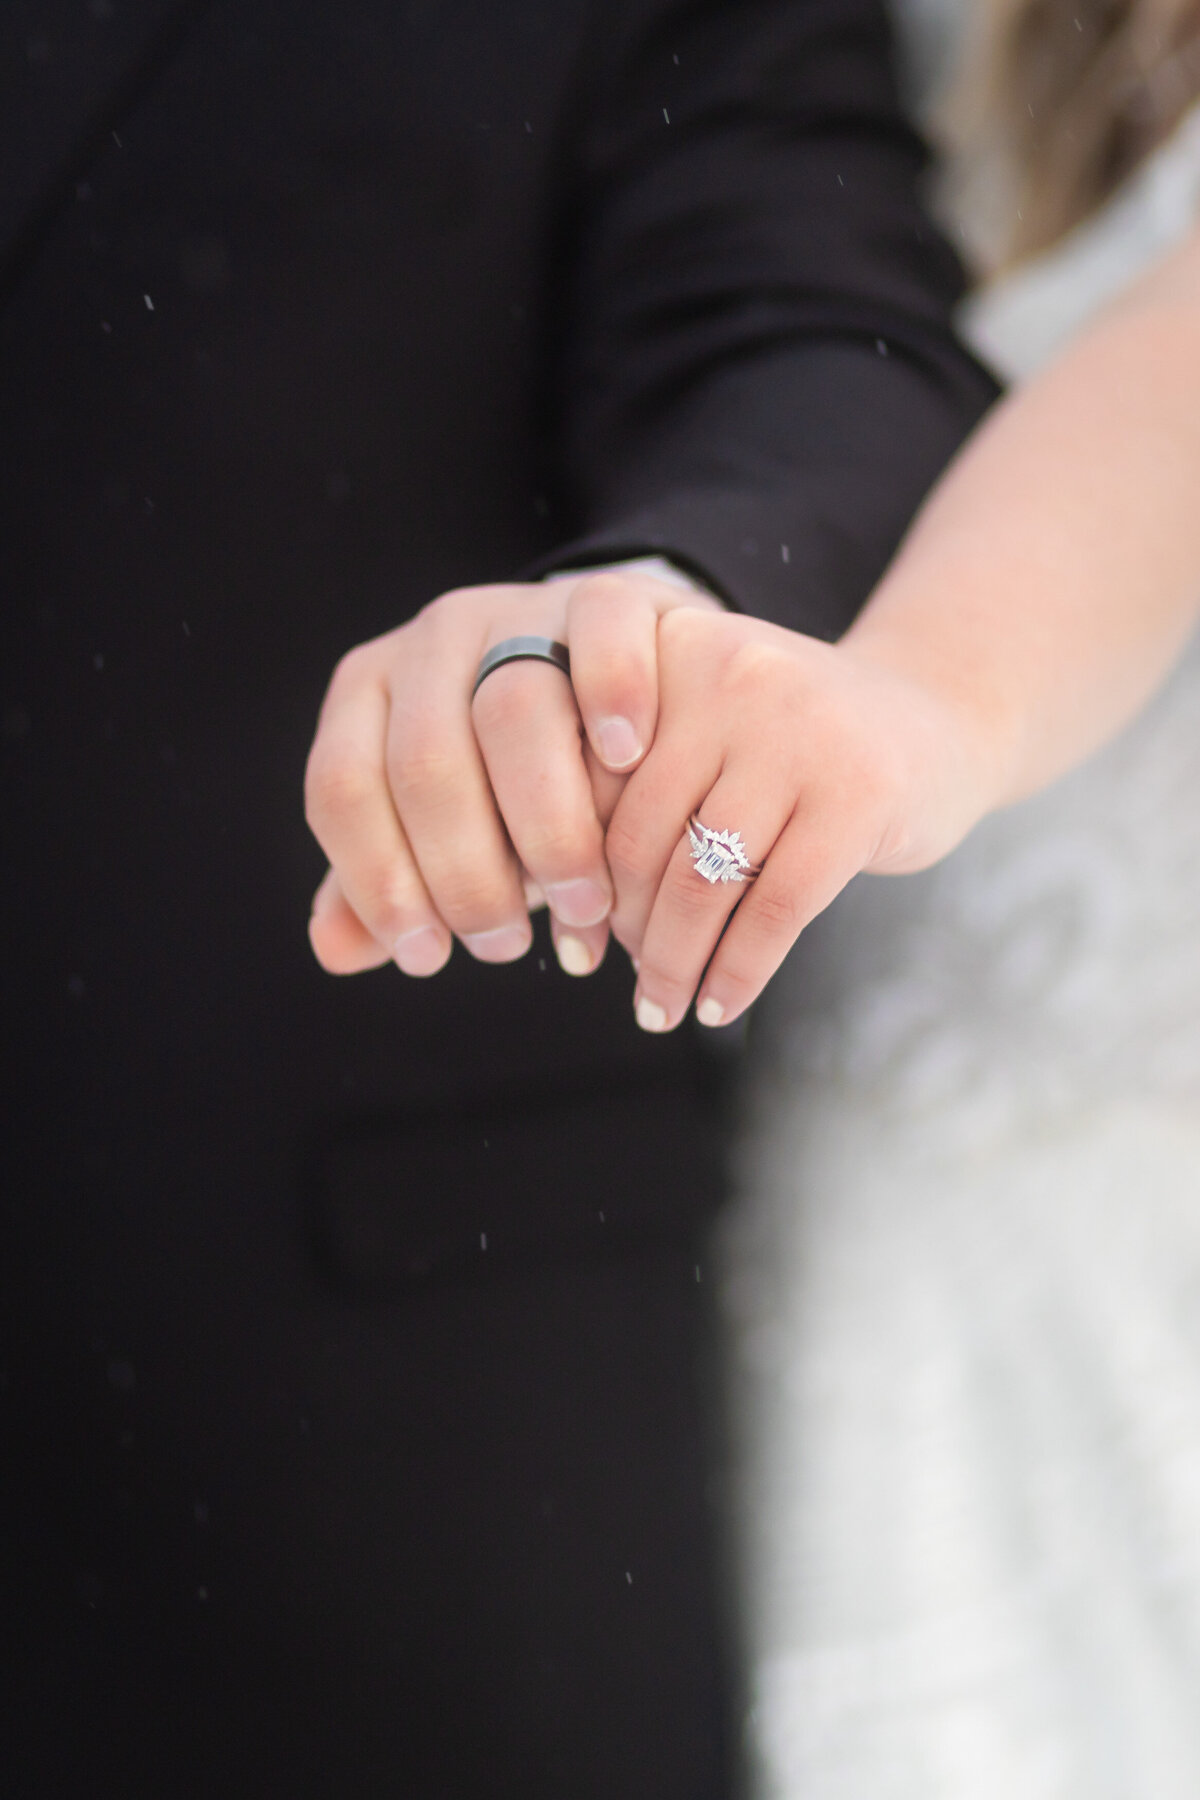 Groom and Bride showing their rings while holding hands